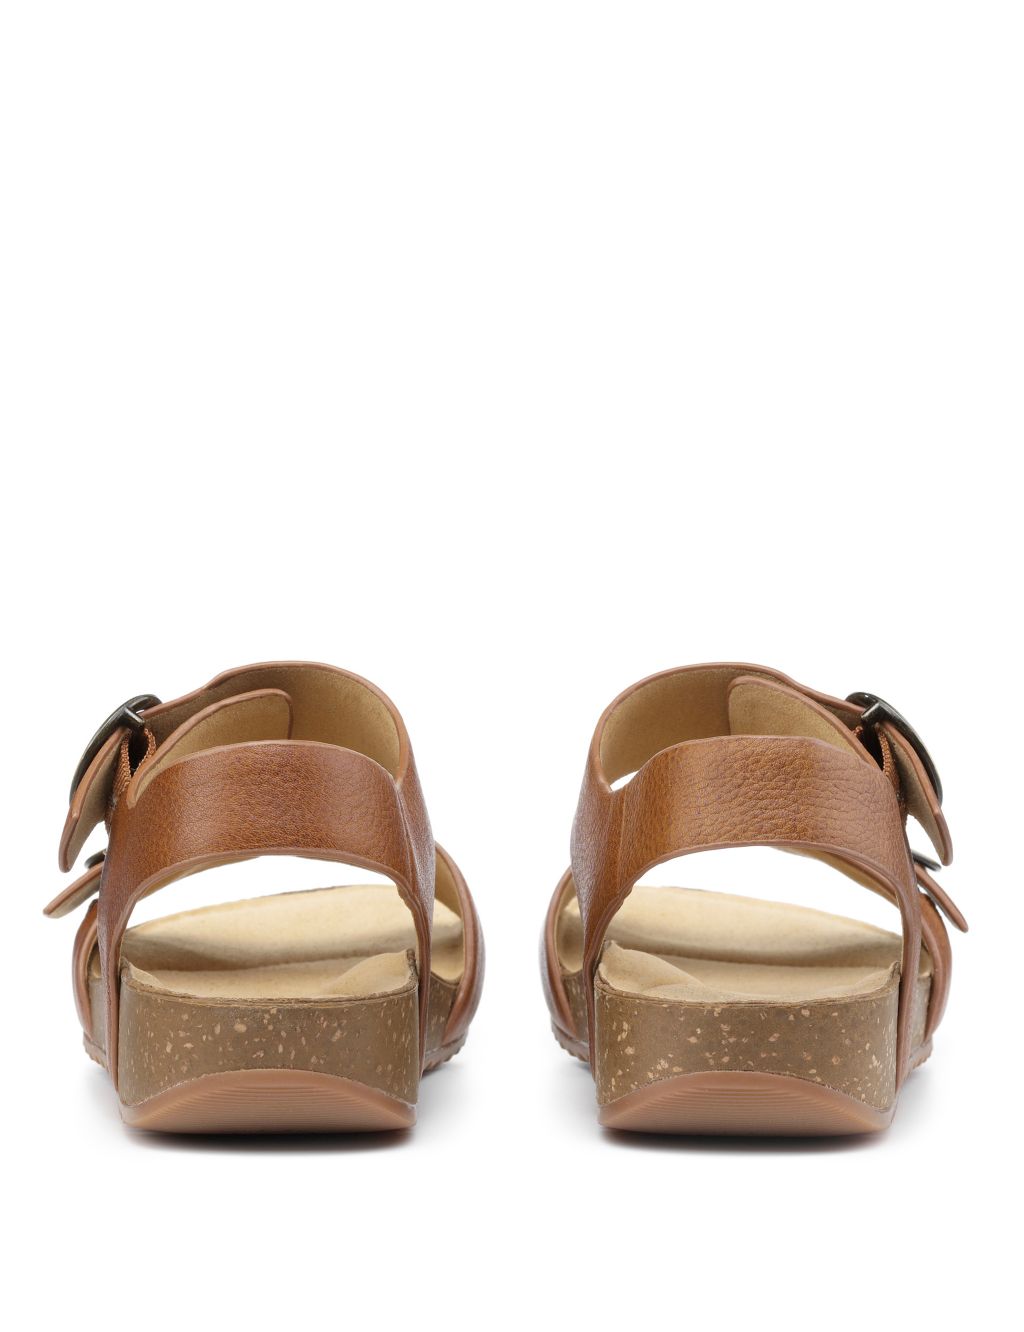 Tourist Wide Fit Leather Wedge Sandals image 3